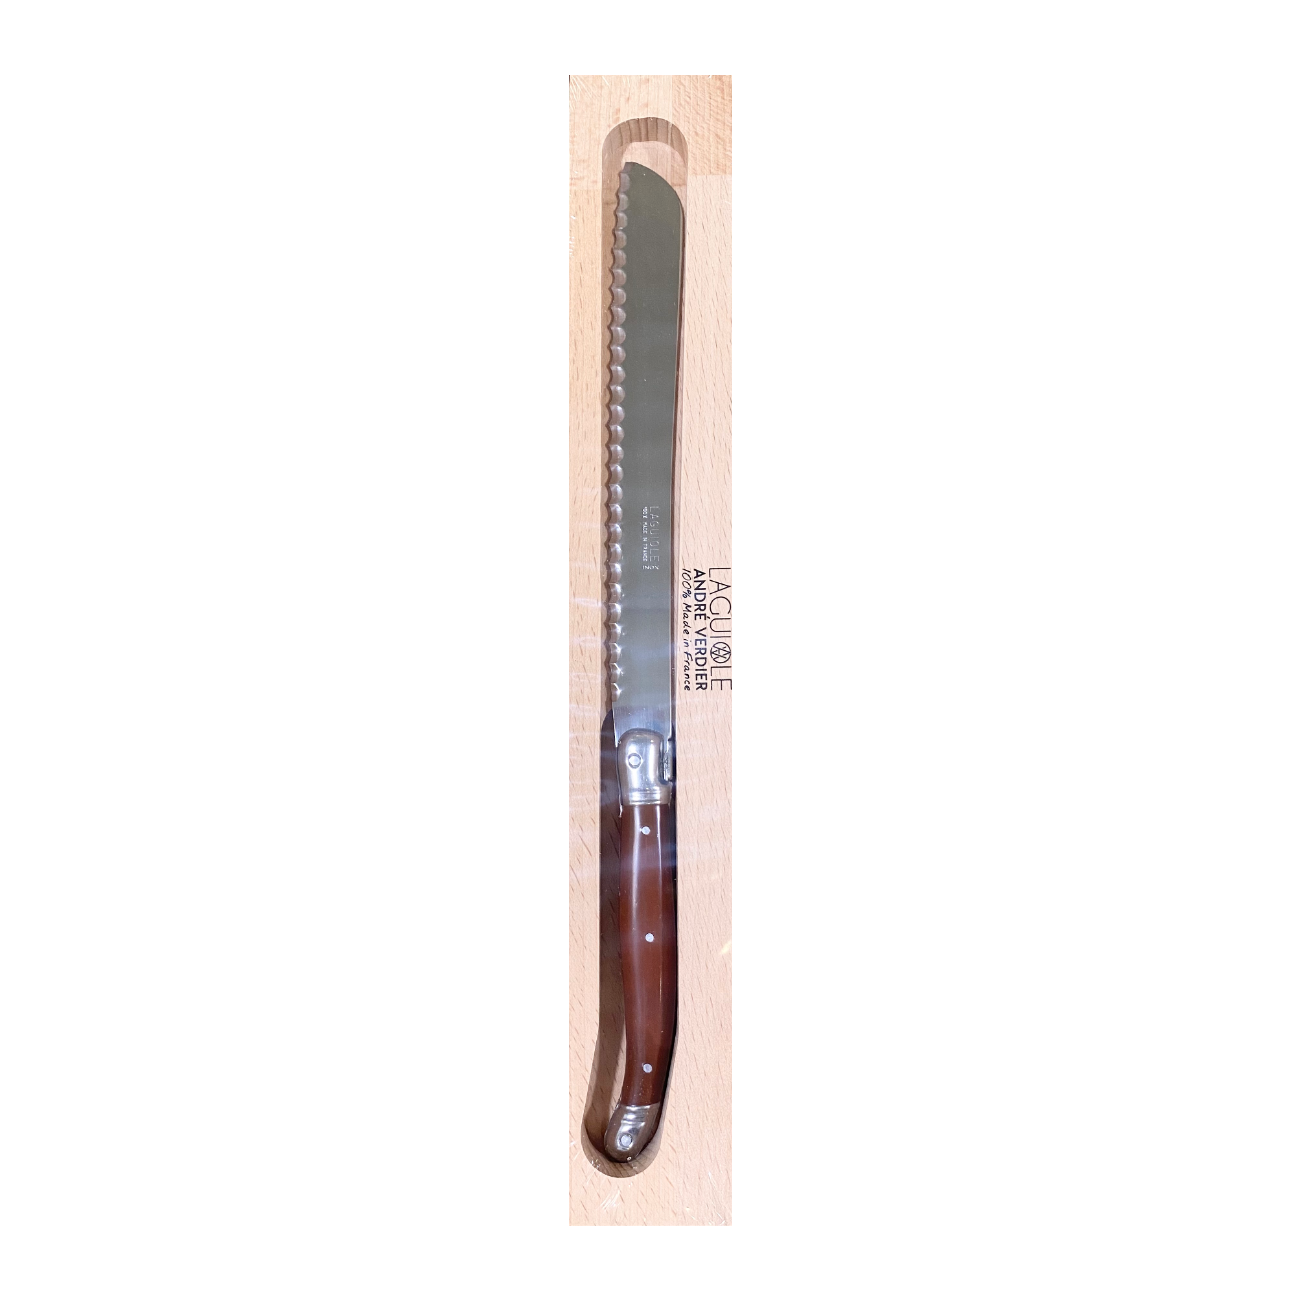 Laguiole French Bread Knife - Rosewood